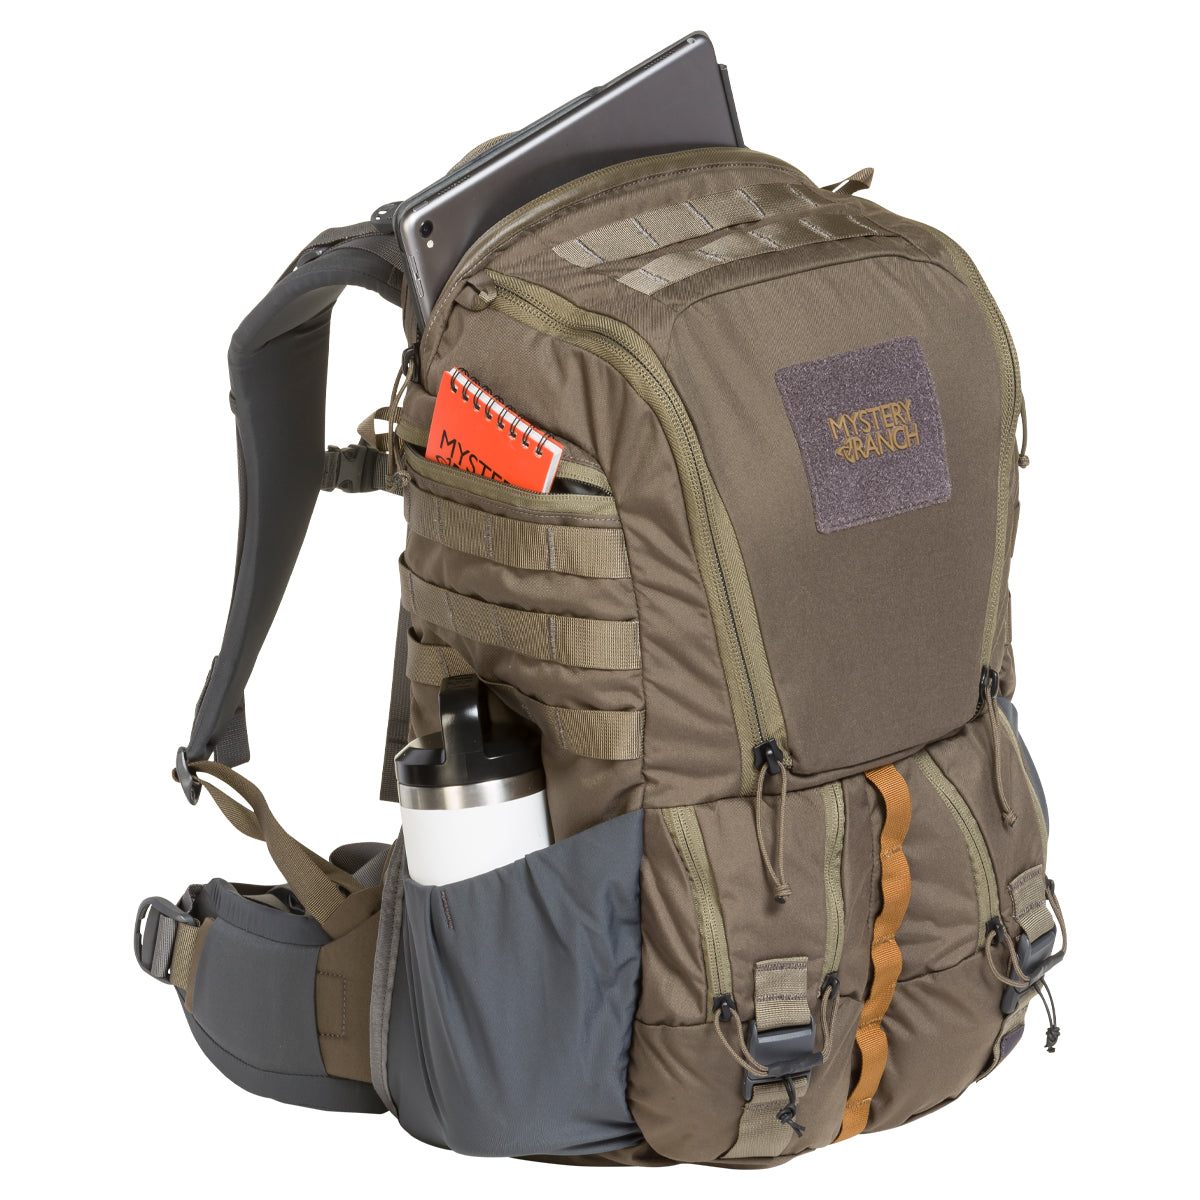 Mystery Ranch Rip Ruck 32 Backpack in  by GOHUNT | Mystery Ranch - GOHUNT Shop